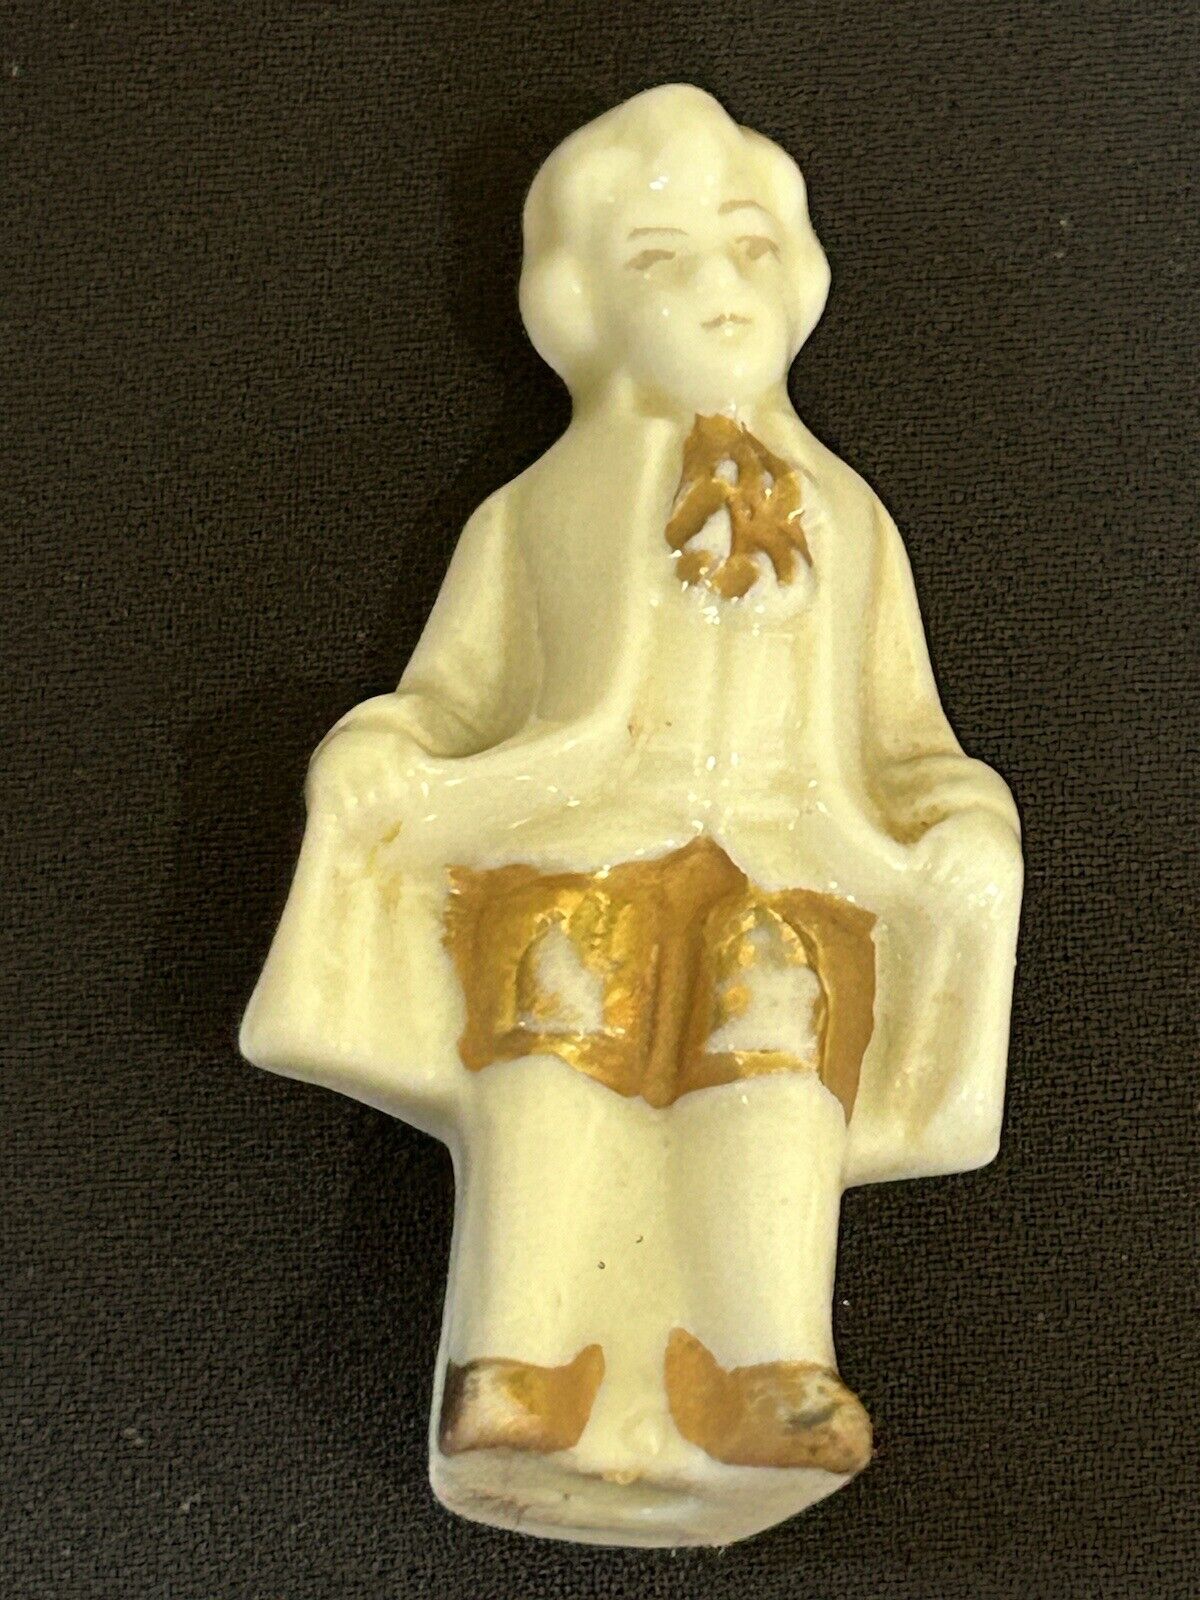 White Porcelain Gold Edged Miniature Boy Antique Figurine Numbered